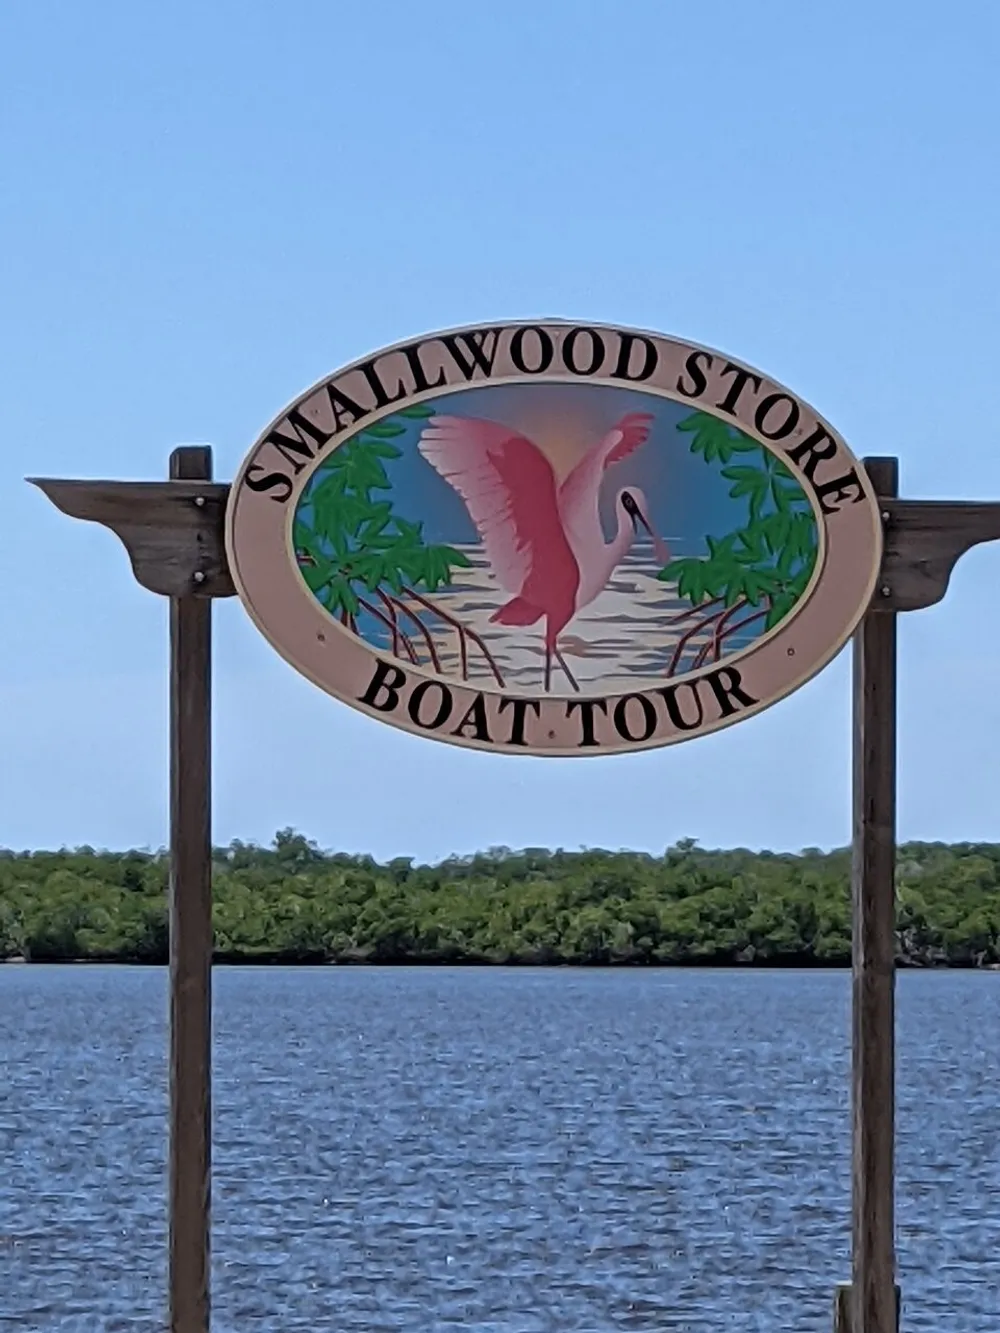 The image shows an oval-shaped sign with the text SMALLWOOD STORE BOAT TOUR and an illustration of a pink flamingo set against a backdrop of water and greenery